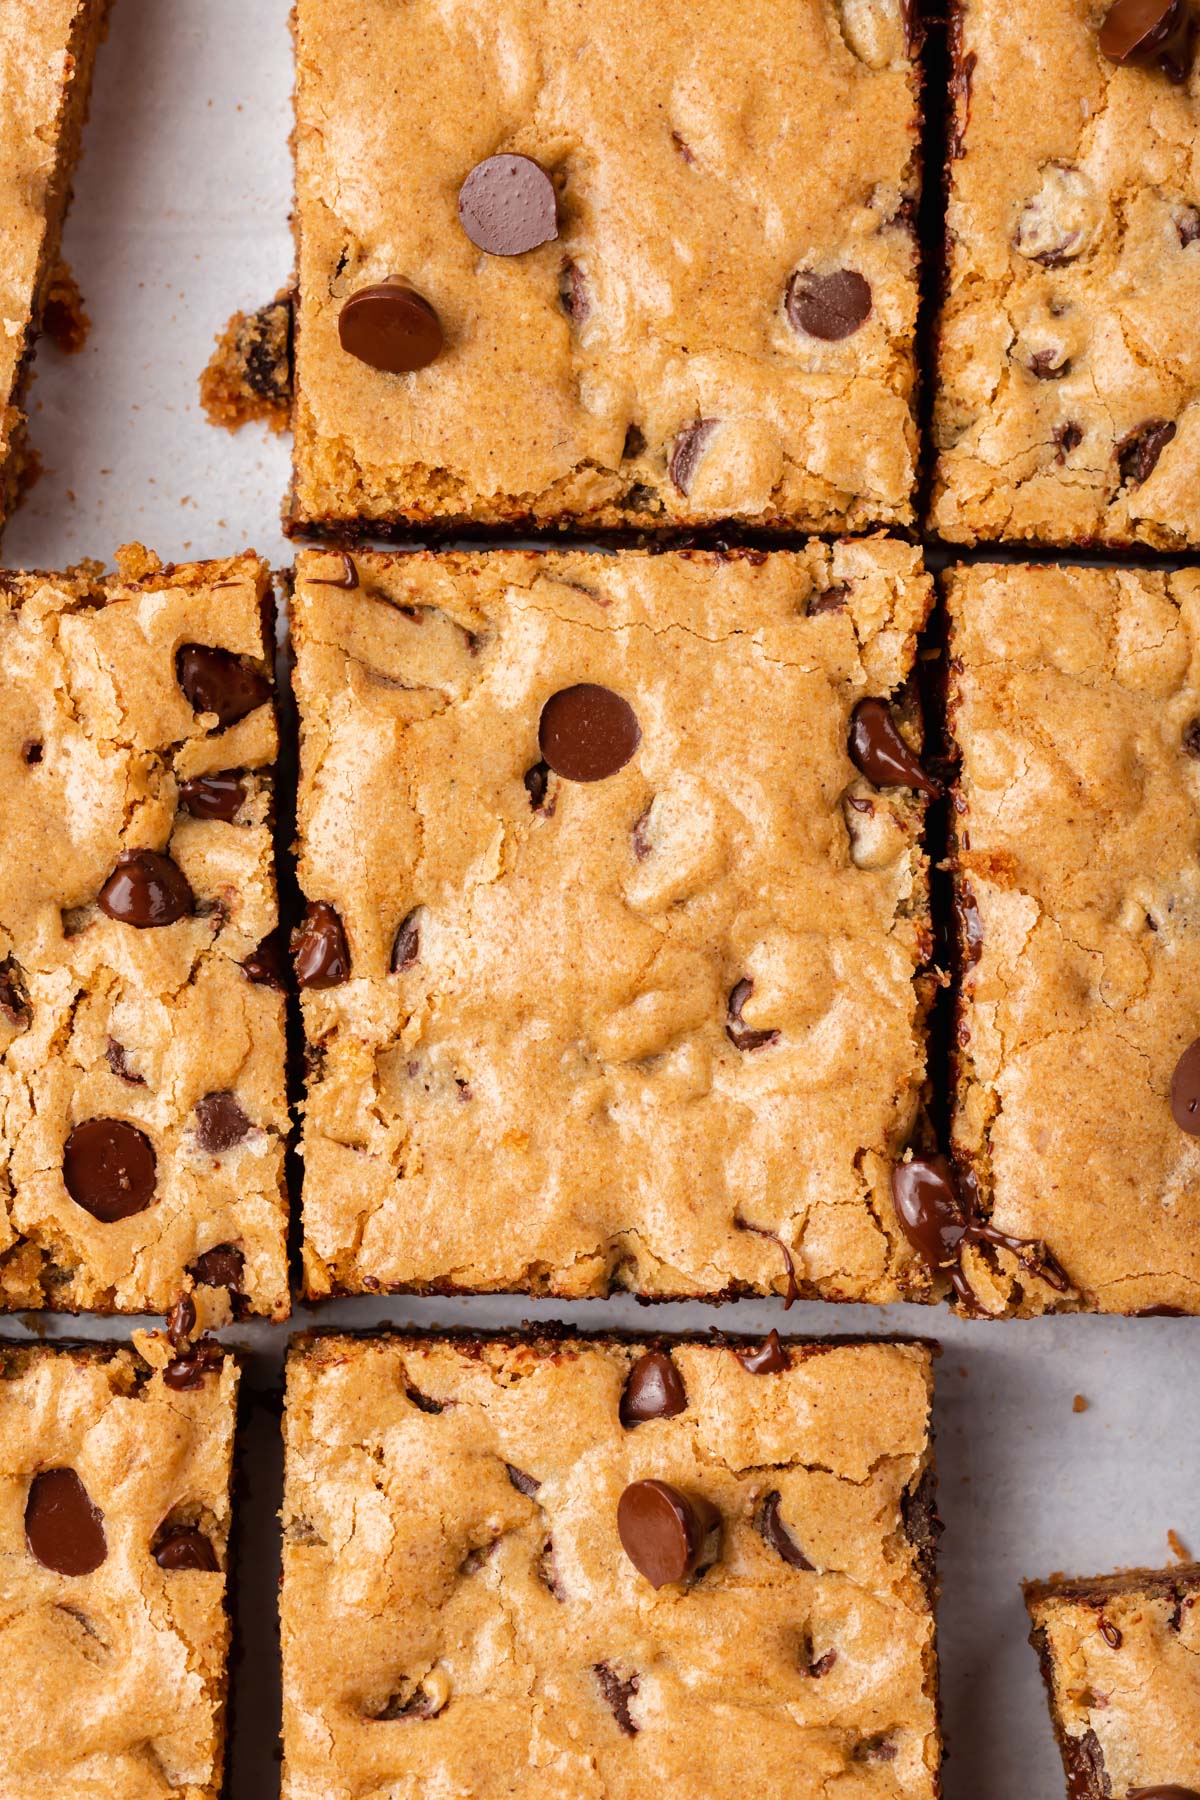 A tray of gluten-free chocolate chip cookie bars.